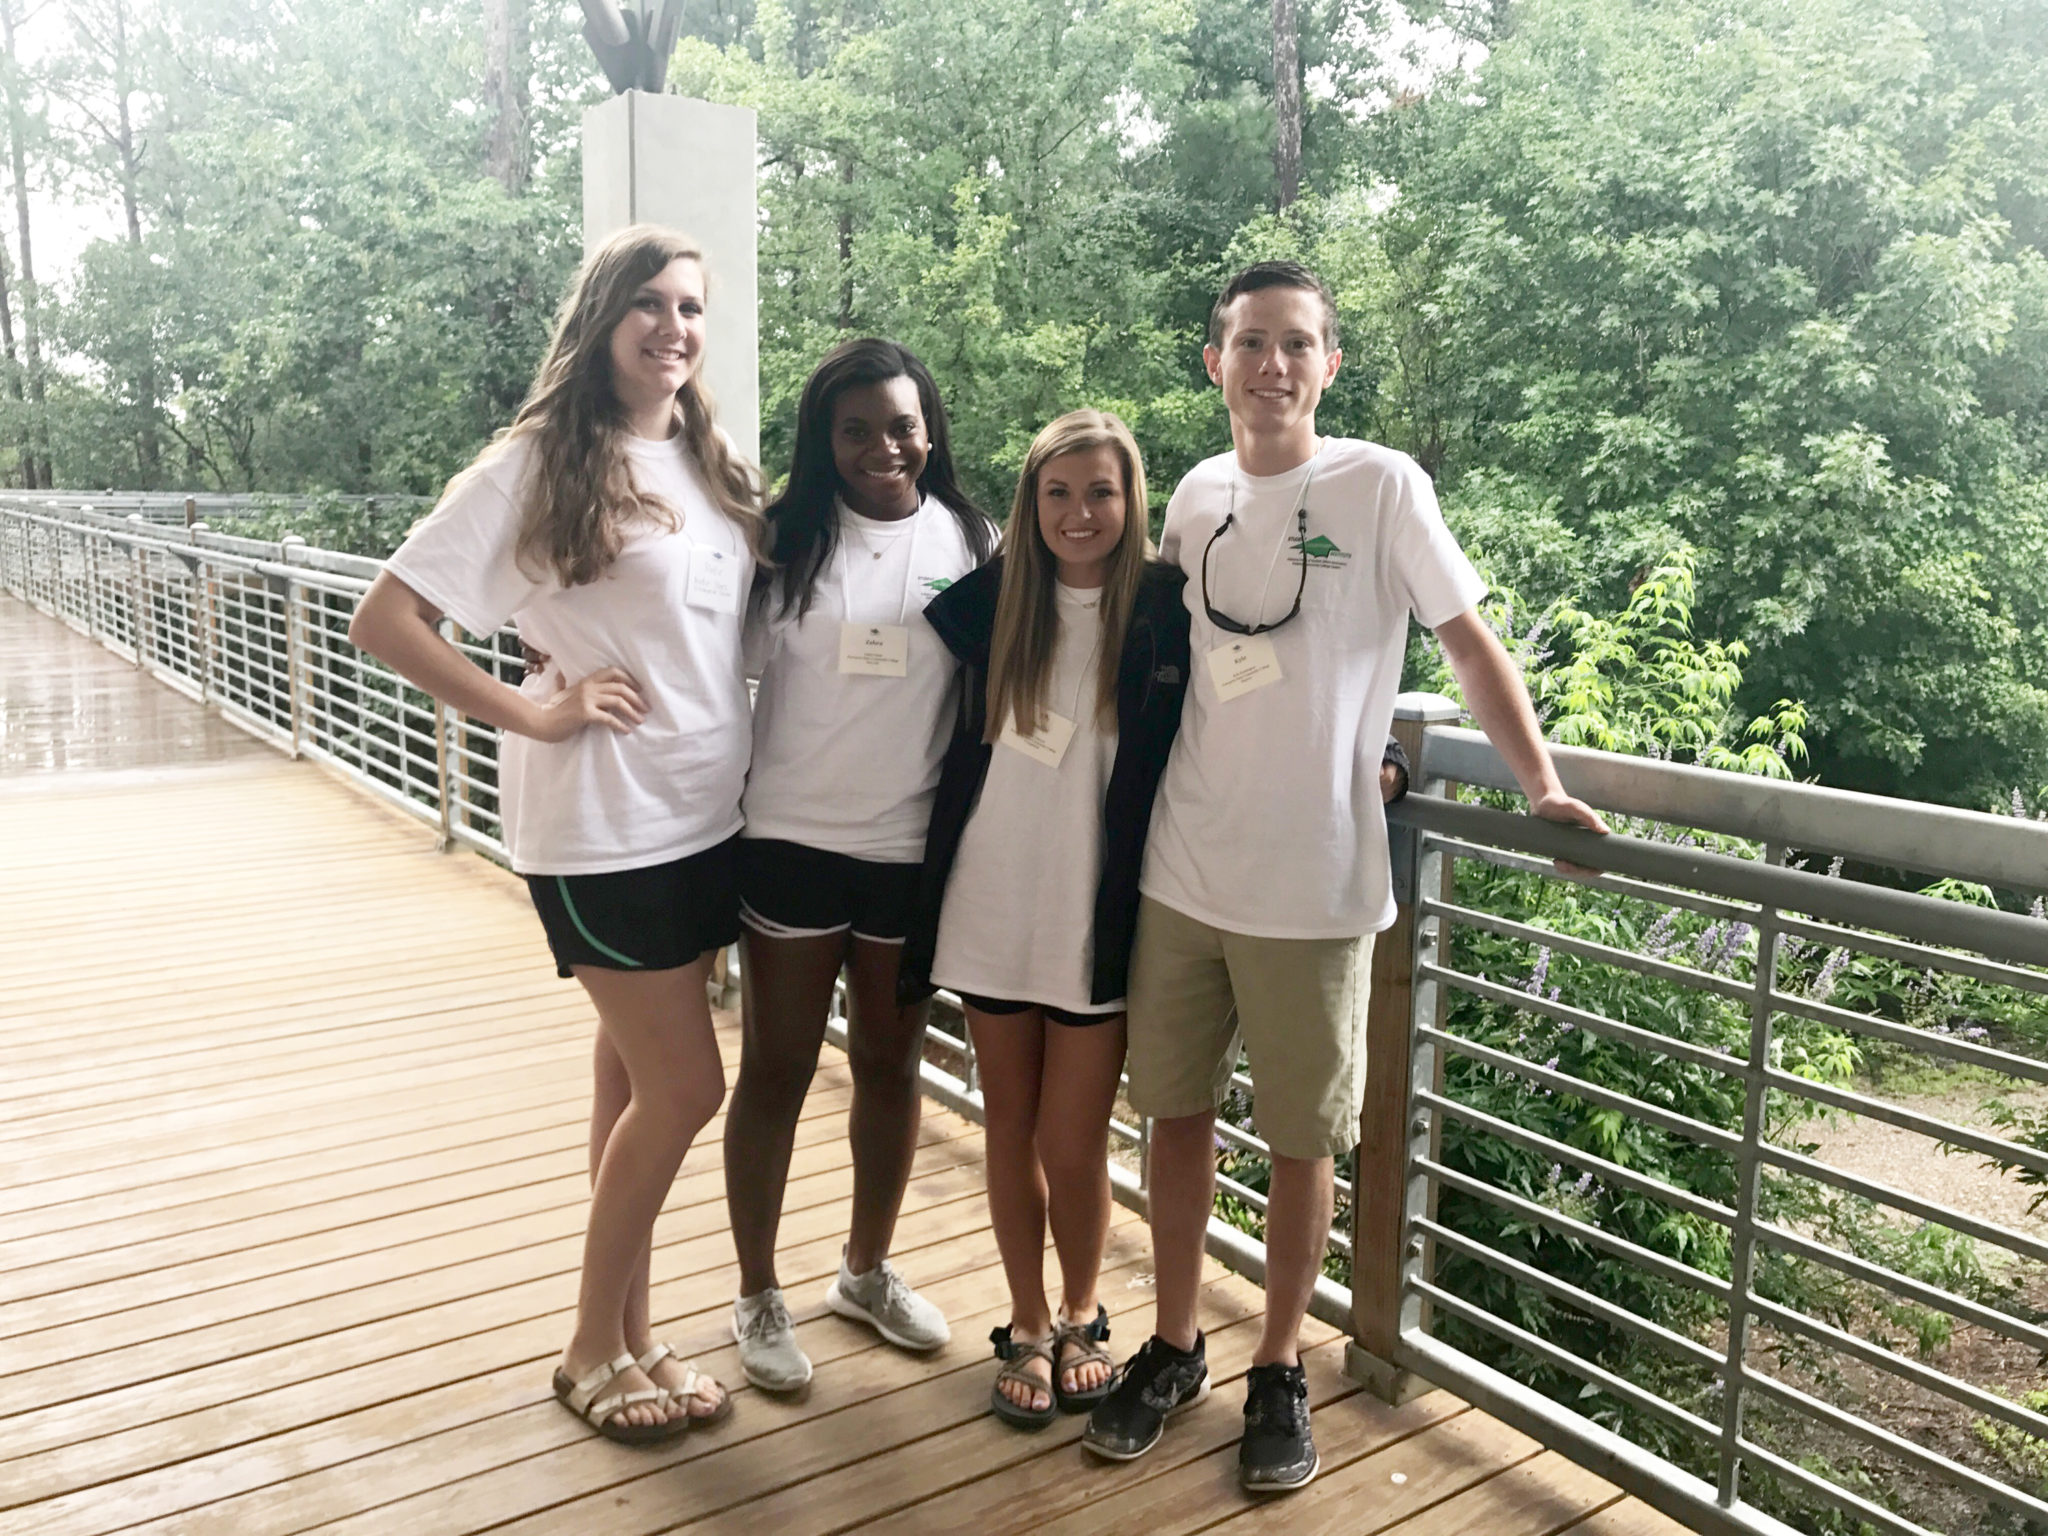 Enterprise State Students attend 2017 Student Leadership Institute at 4-H Center